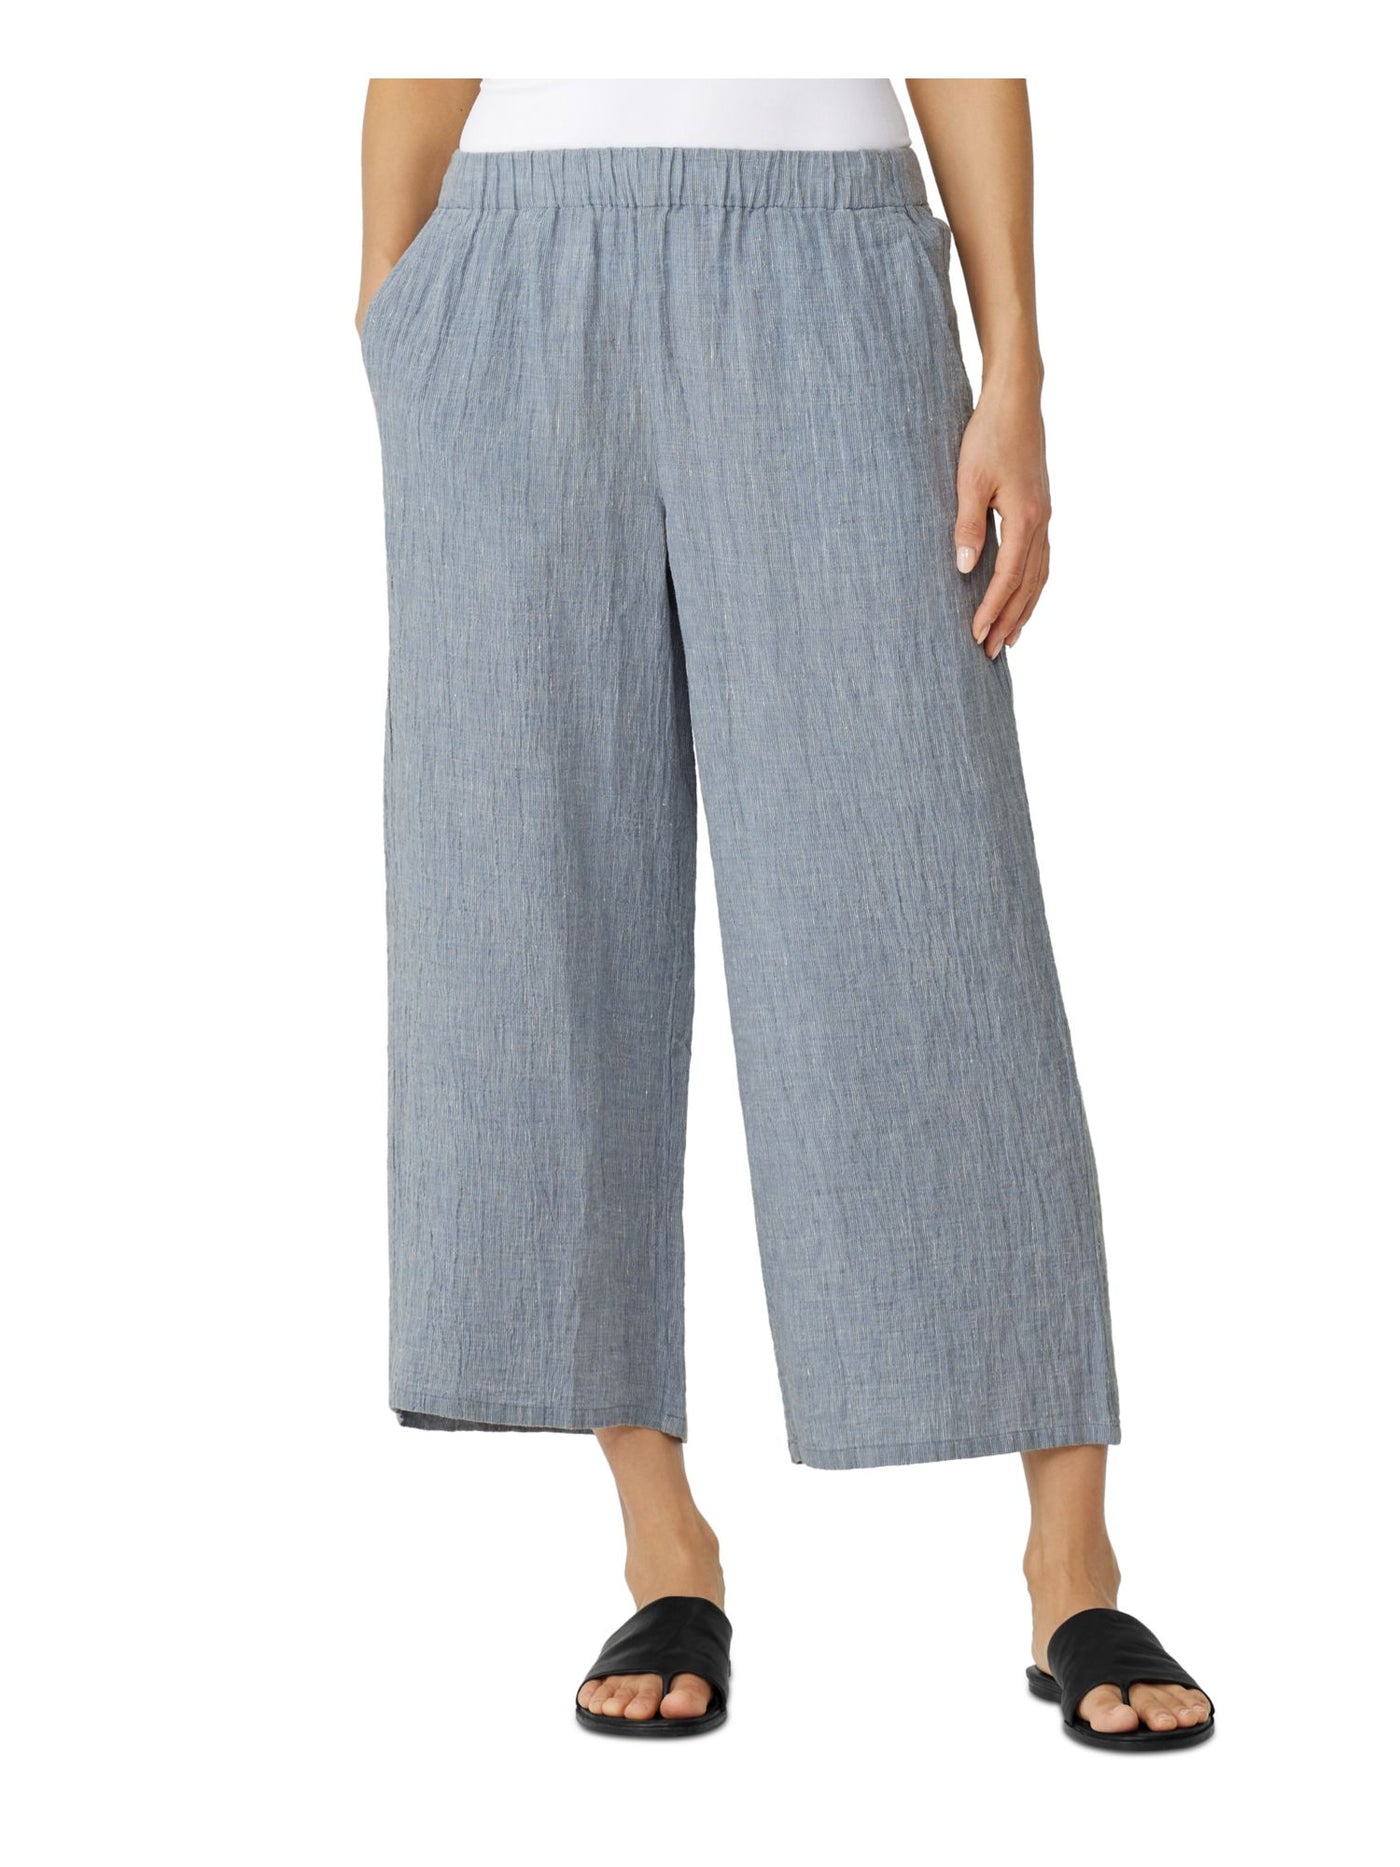 EILEEN FISHER Womens Light Blue Pocketed Elastic Waist Pull On Pinstripe Cropped Pants Petites PL